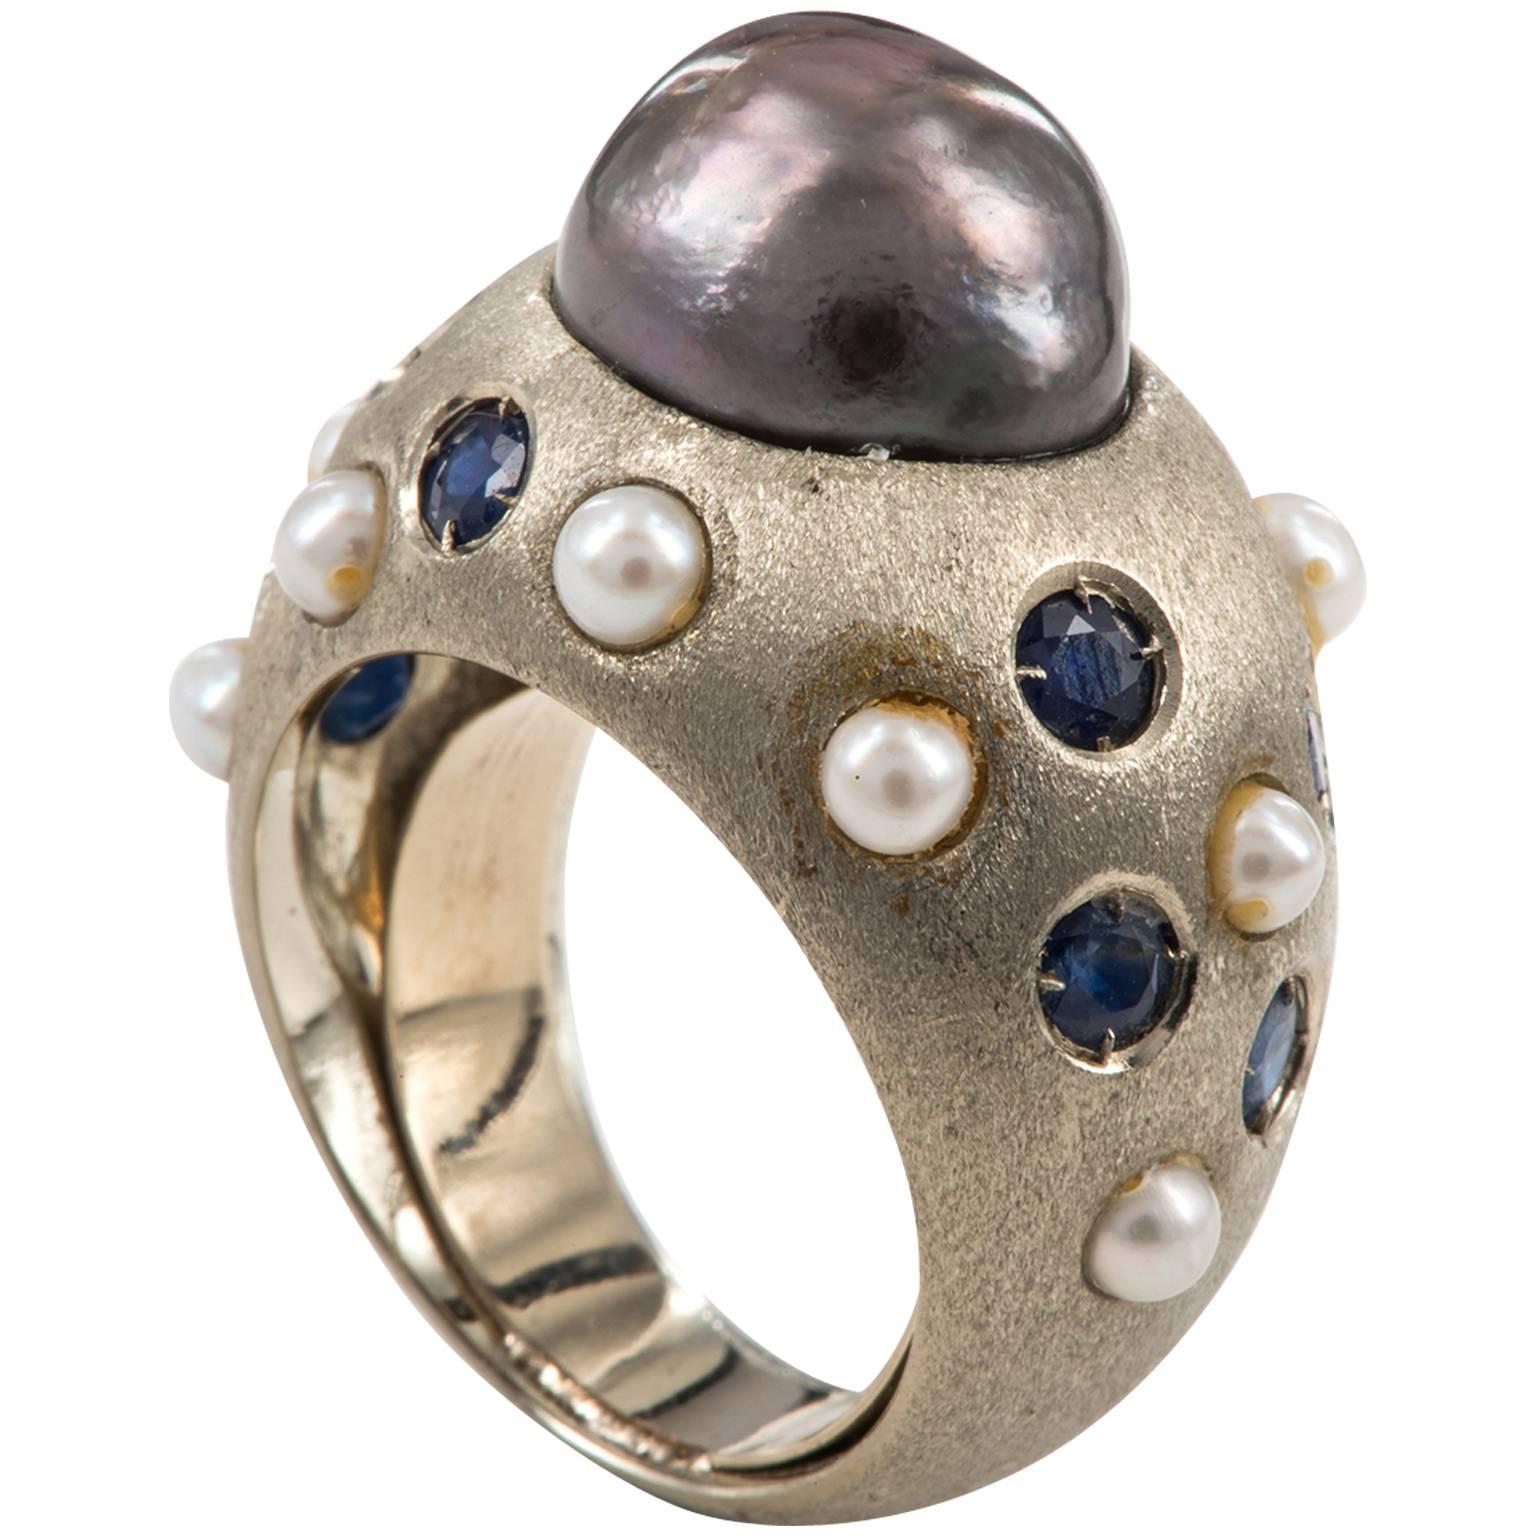 Ring : Black Pearl on White Brushed Gold with Sapphires